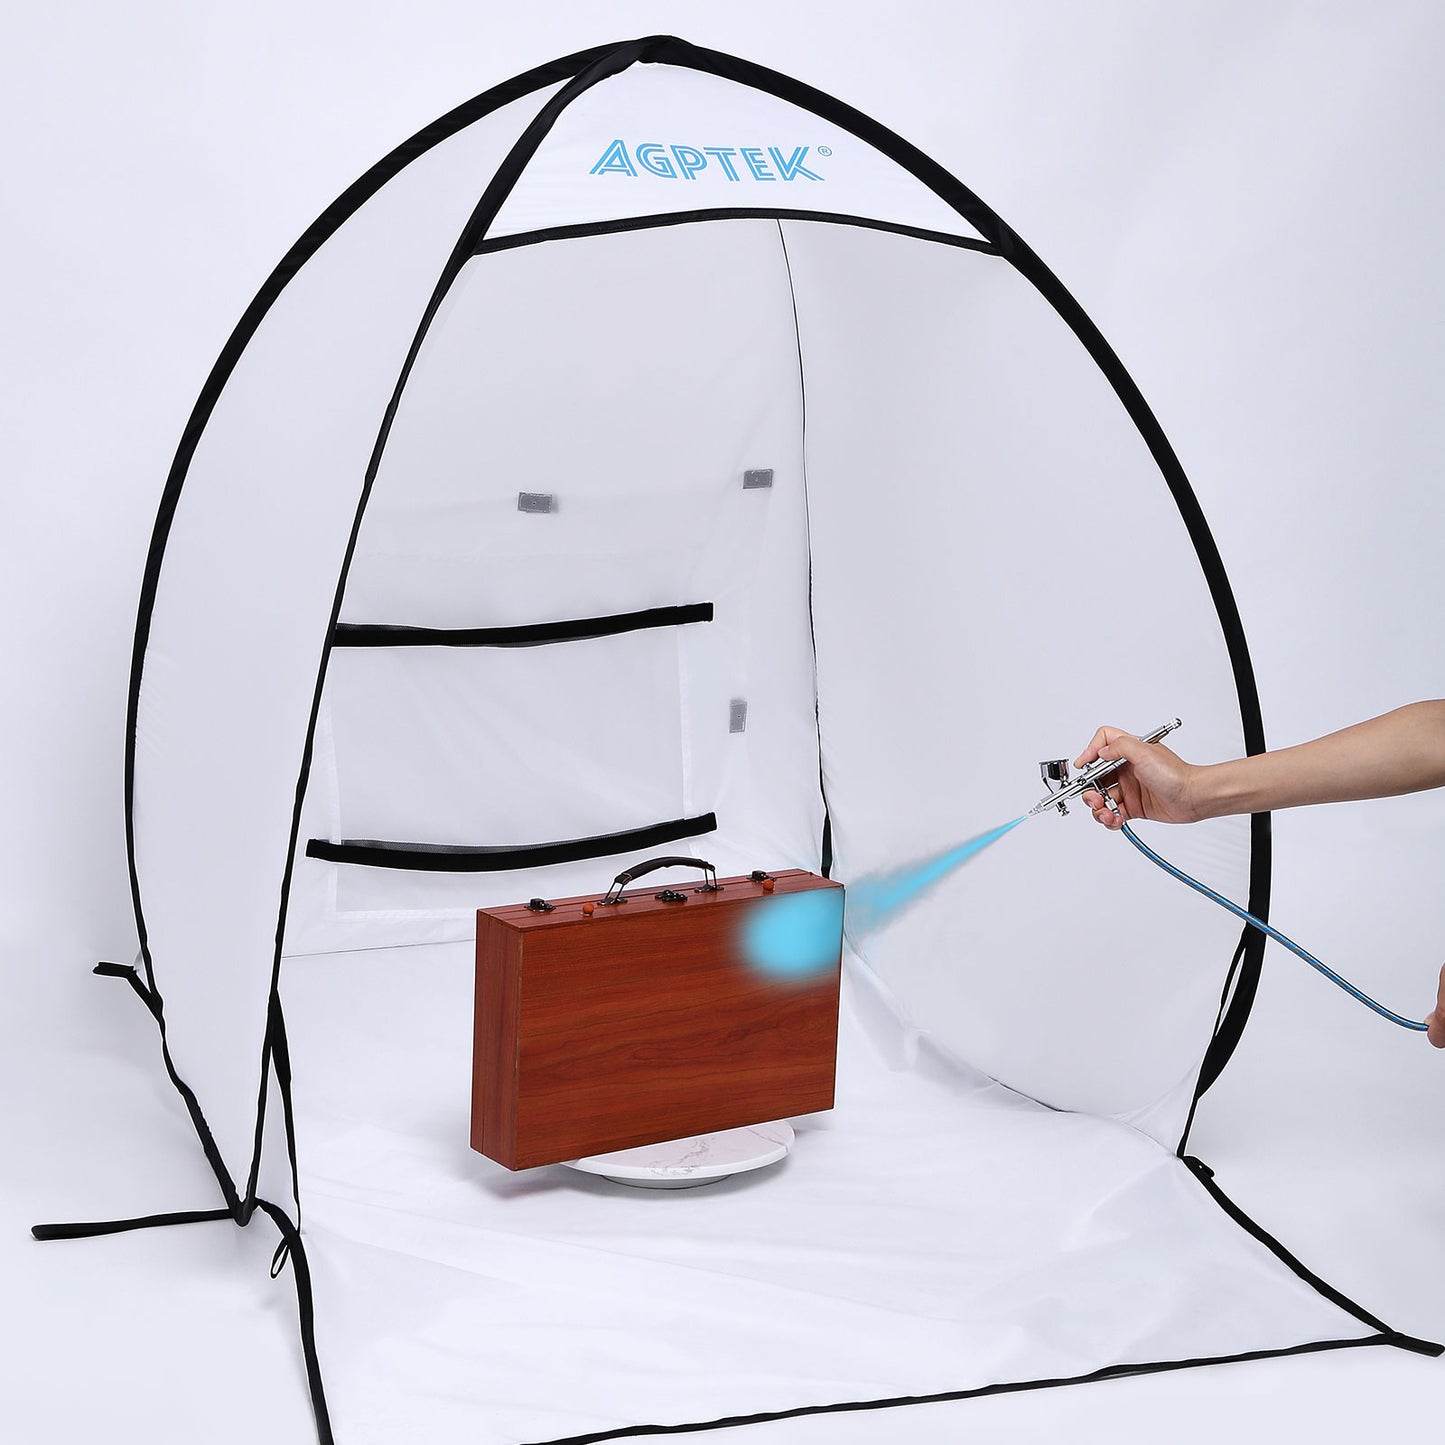  Sewinfla Spray Paint Tent Airbrush Spray Shelter Portable Paint  Booth for DIY Spray Painting, Hobby Paint Booth Tool Painting Station,  Spray Paint Booth : Everything Else